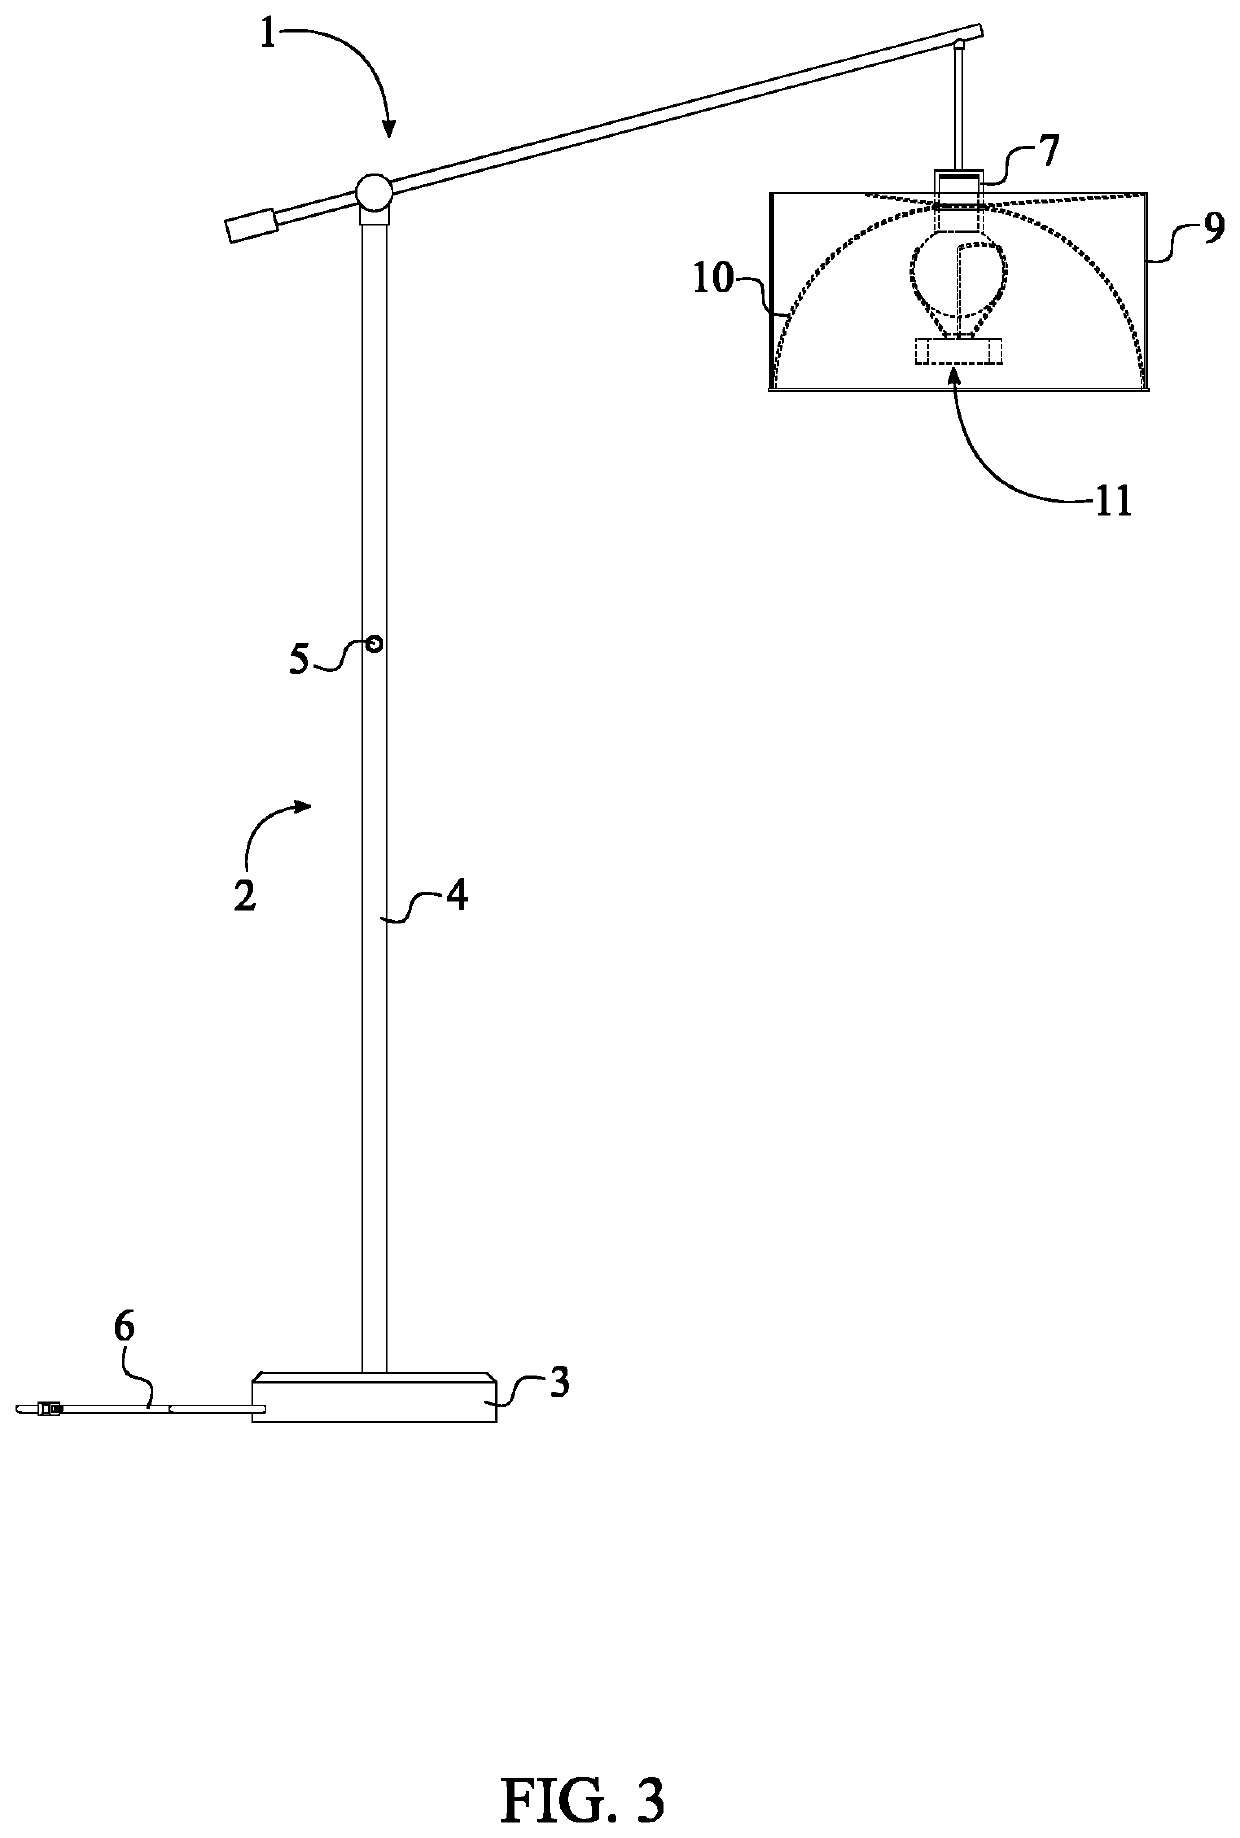 Light fixture and directional assistive listening device